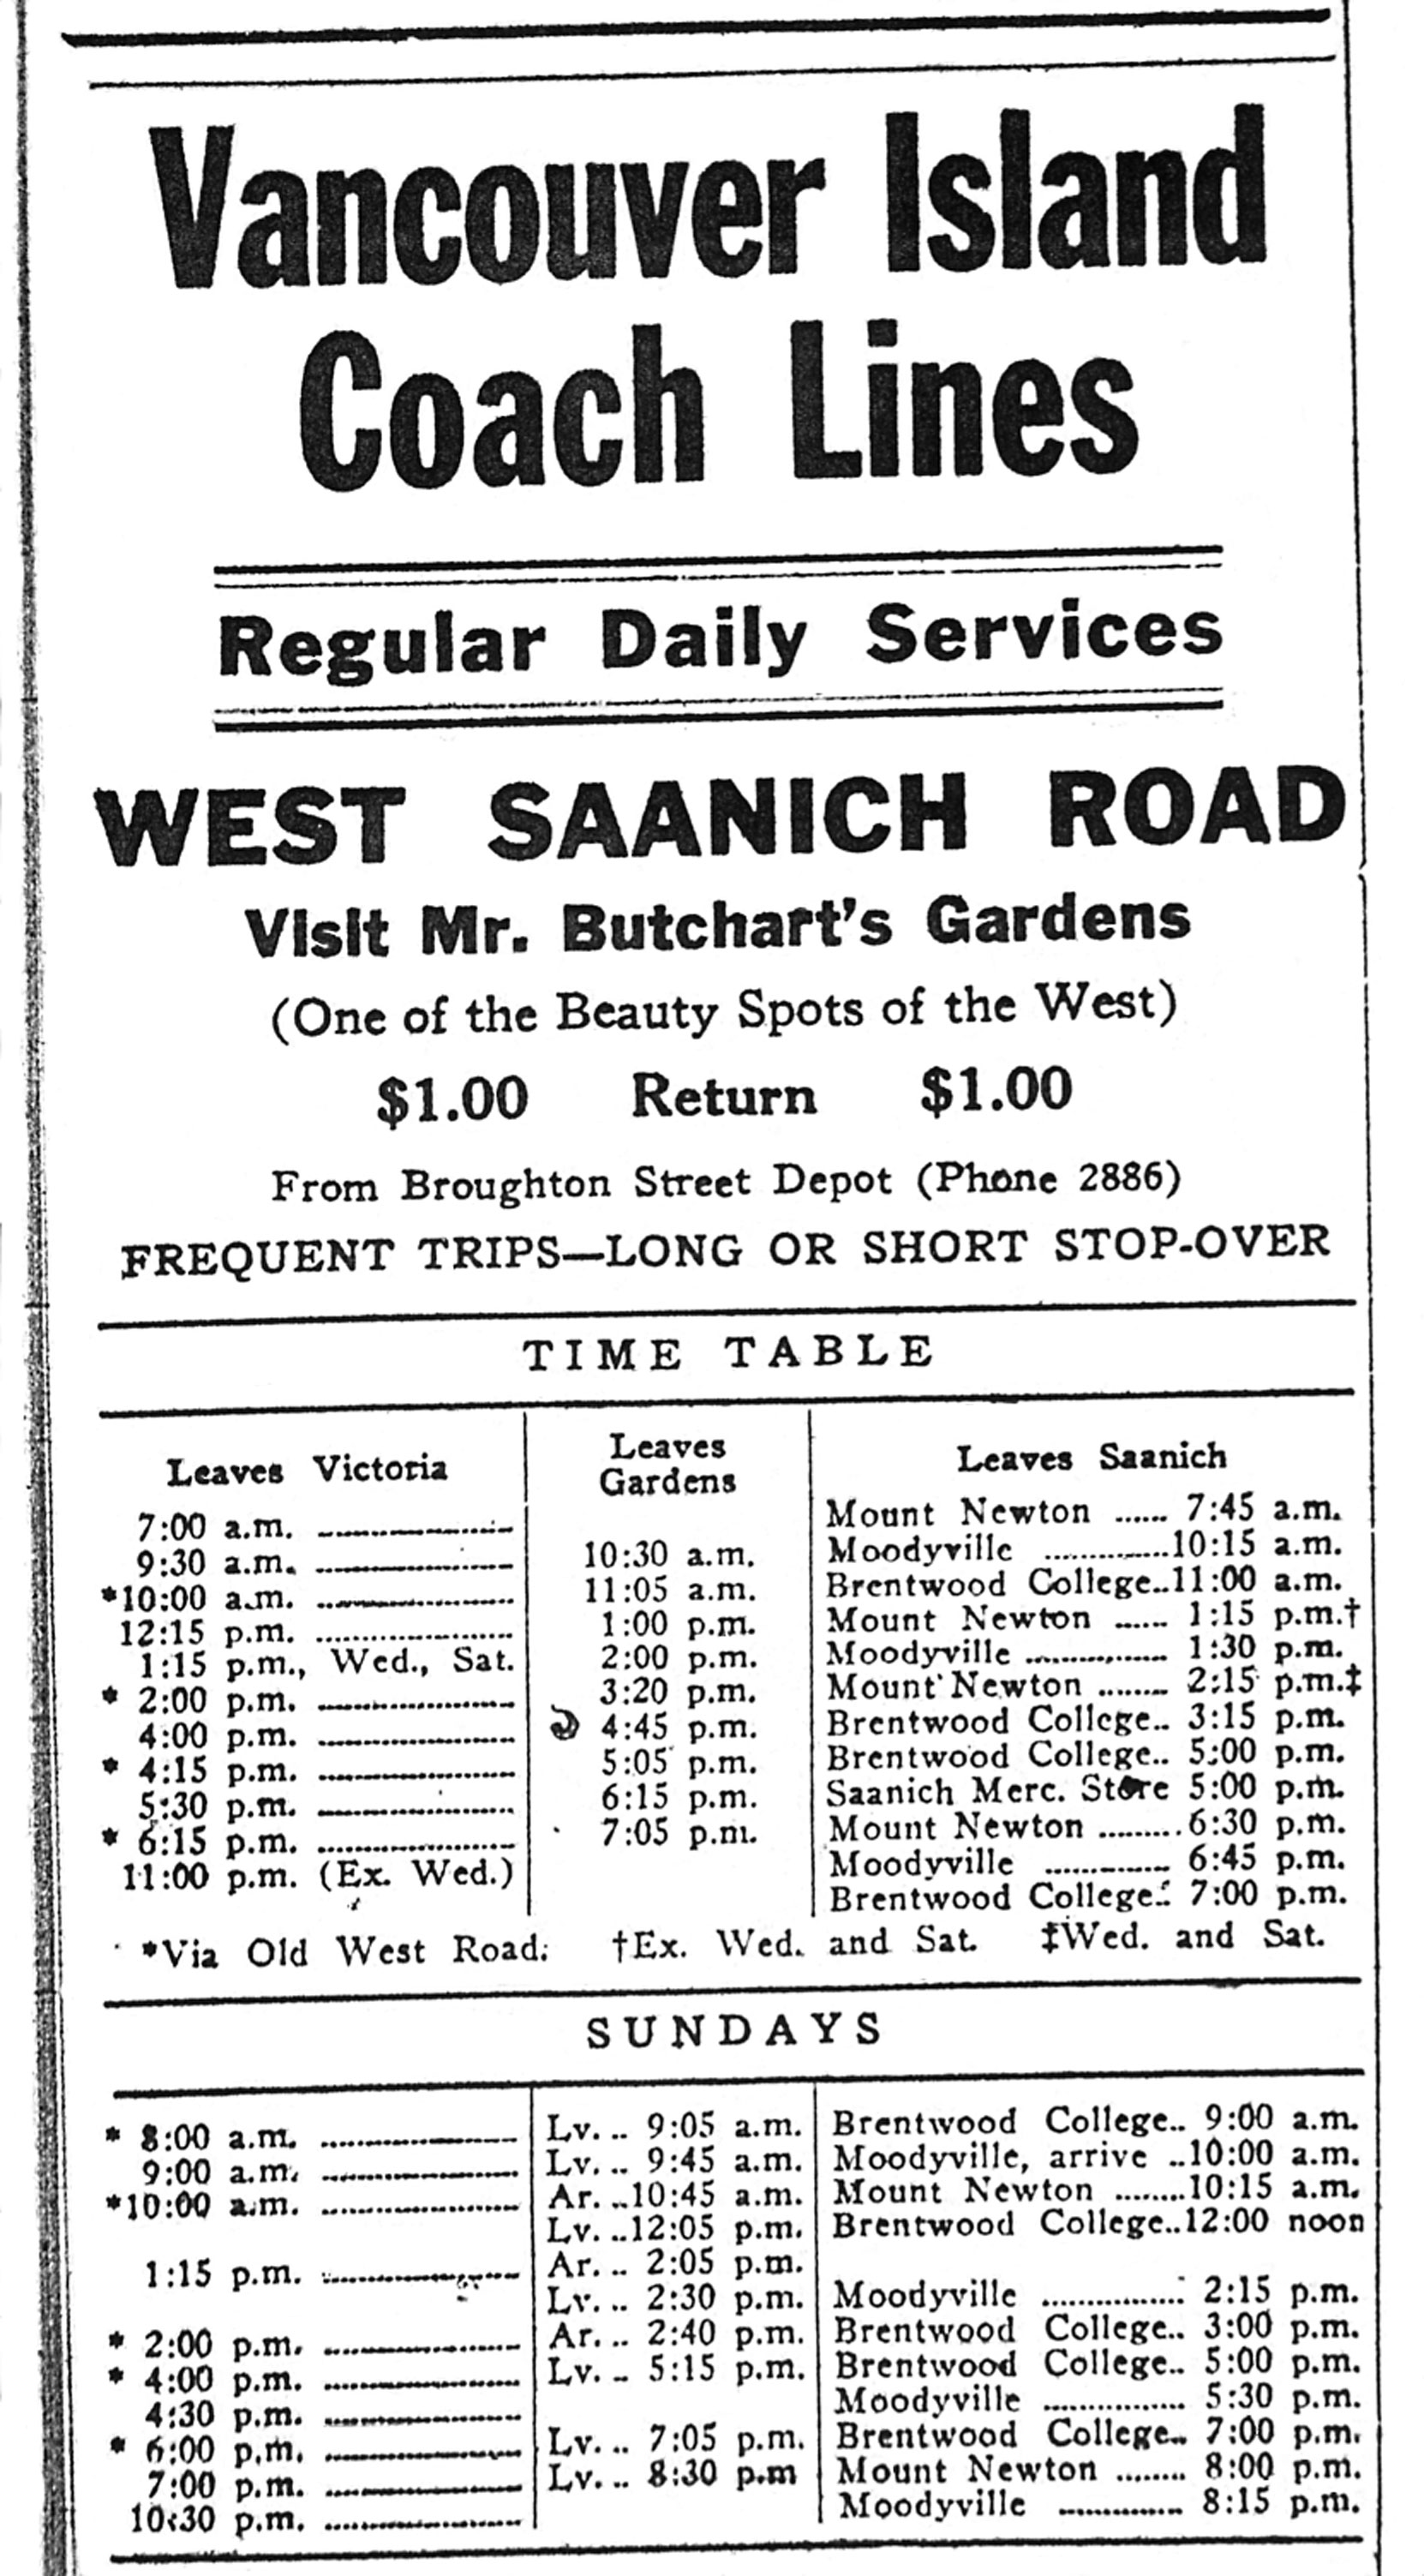 Vancouver Island Coach Lines schedule, June 1927 Note the reference to "Visit Mr. Butchart's Gardens". (Author's collection)